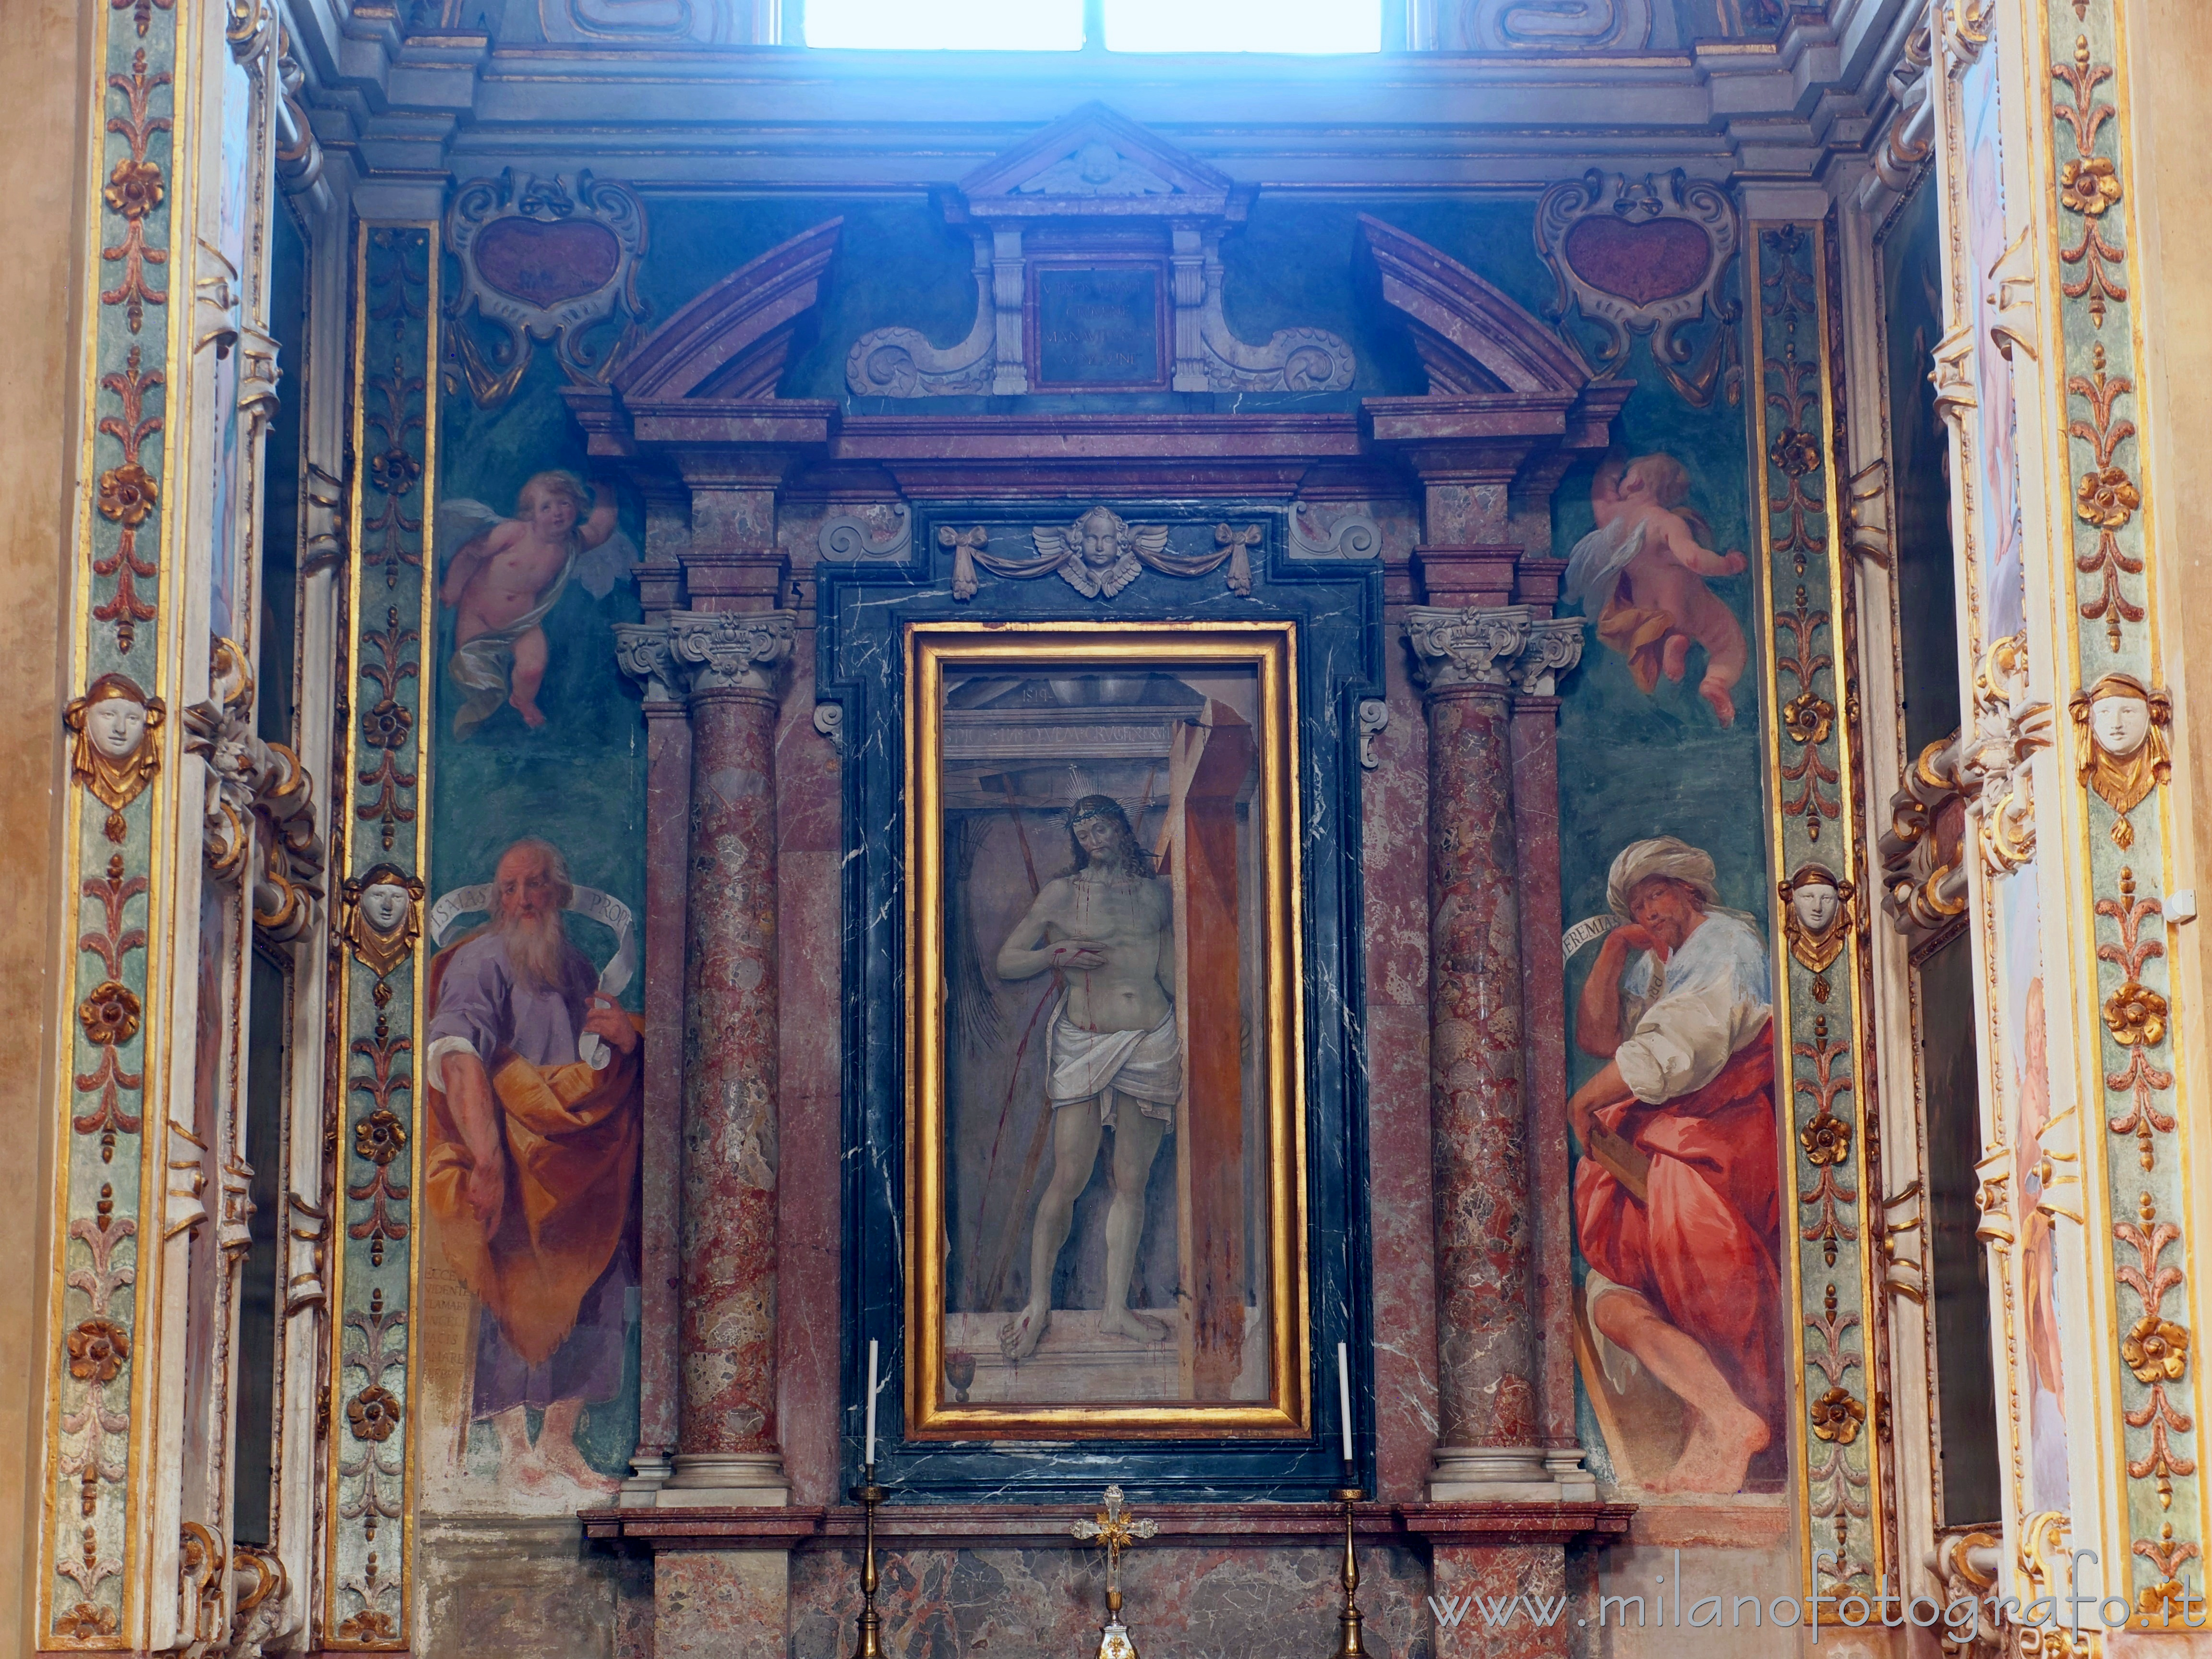 Vimercate (Monza e Brianza, Italy): Back wall of the Chapel of the Savior in the Sanctuary of the Blessed Virgin of the Rosary - Vimercate (Monza e Brianza, Italy)